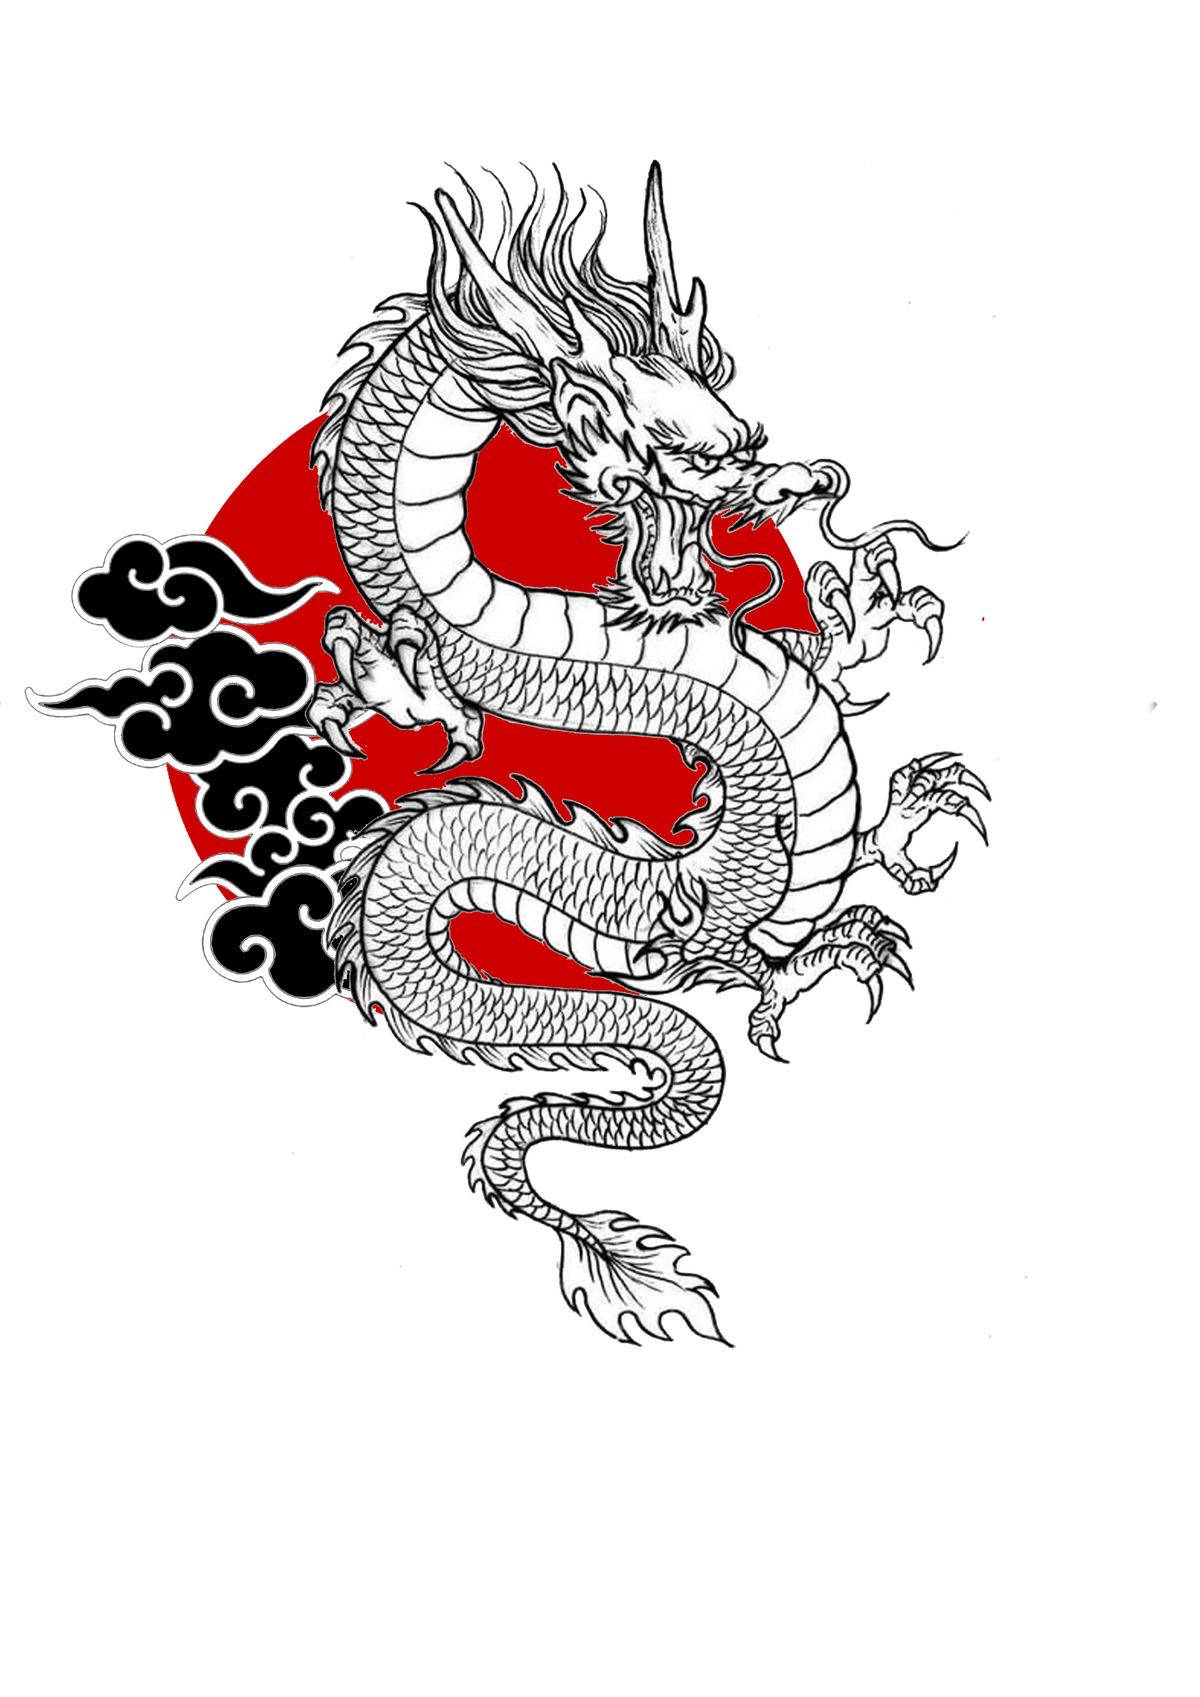 Caption: Ferocious Elegance - Majestic Japanese Dragon Tattoo In A Red Circle